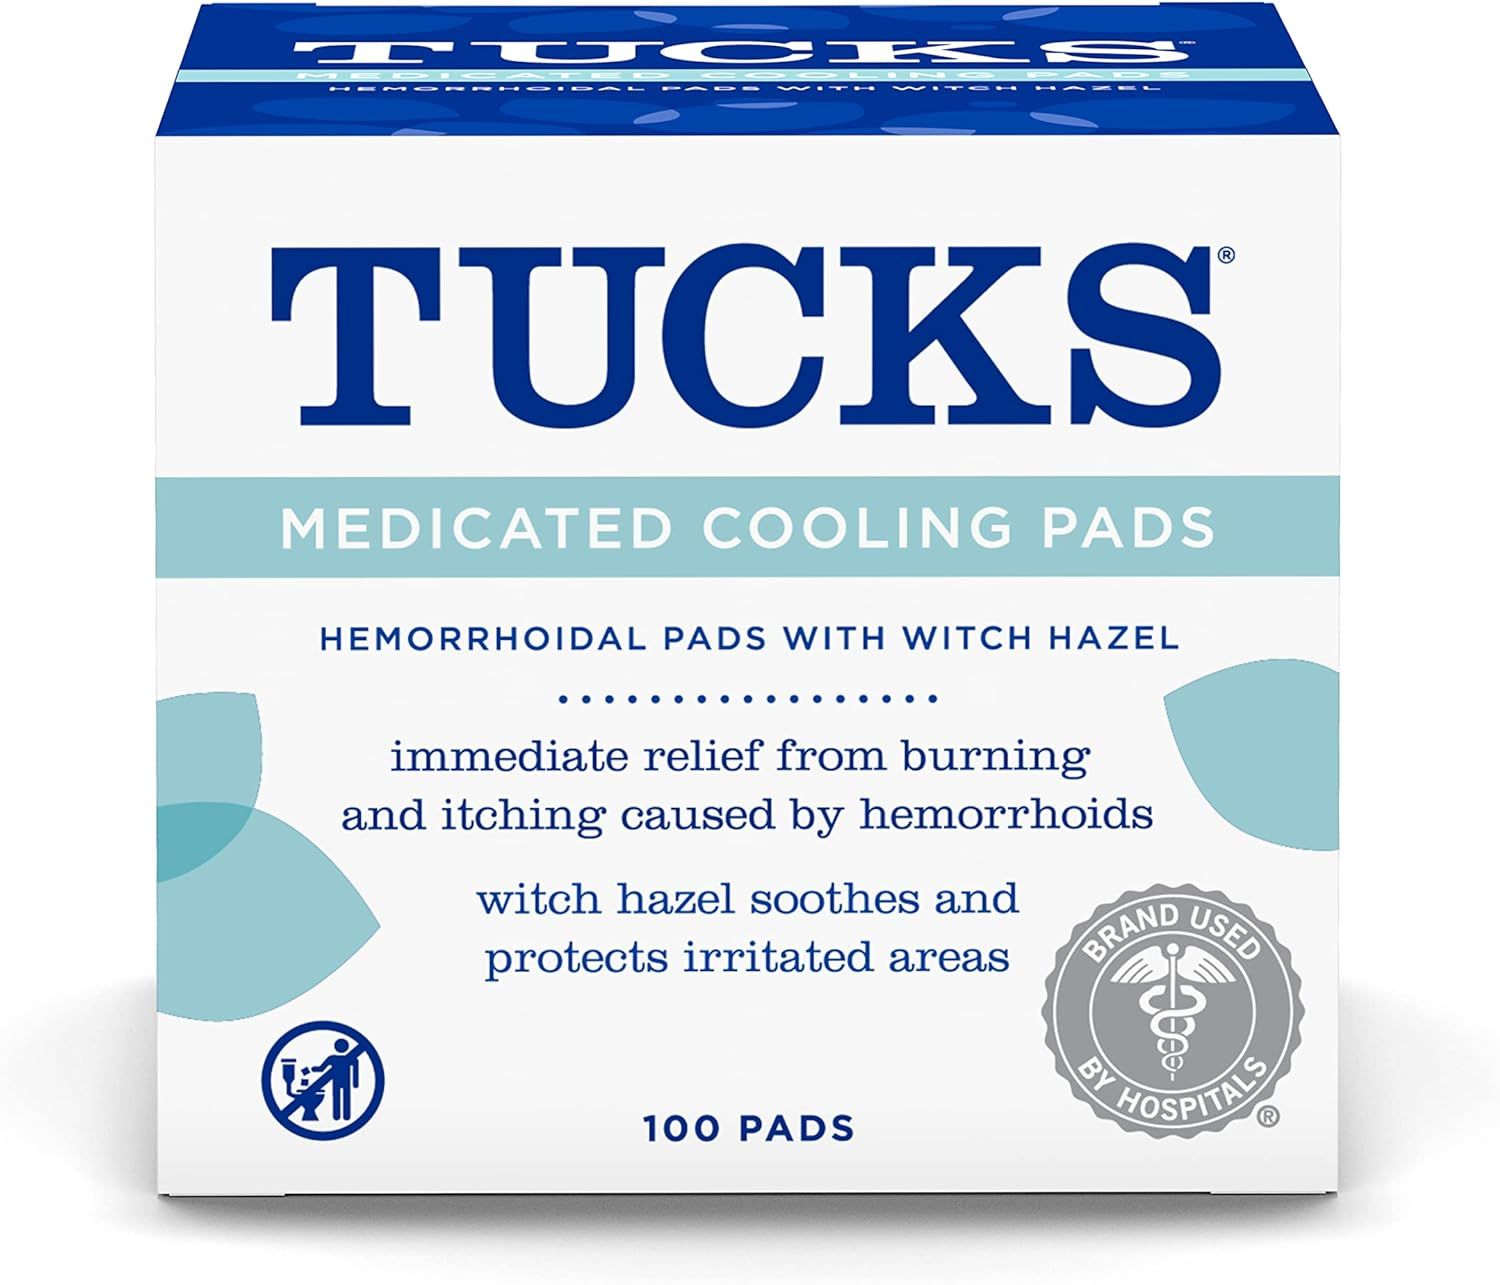 TUCKS Medicated Cooling Pads, 100 Count – Hemorrhoid Pads with Witch Hazel, Cleanses Sensitive ... | Amazon (US)